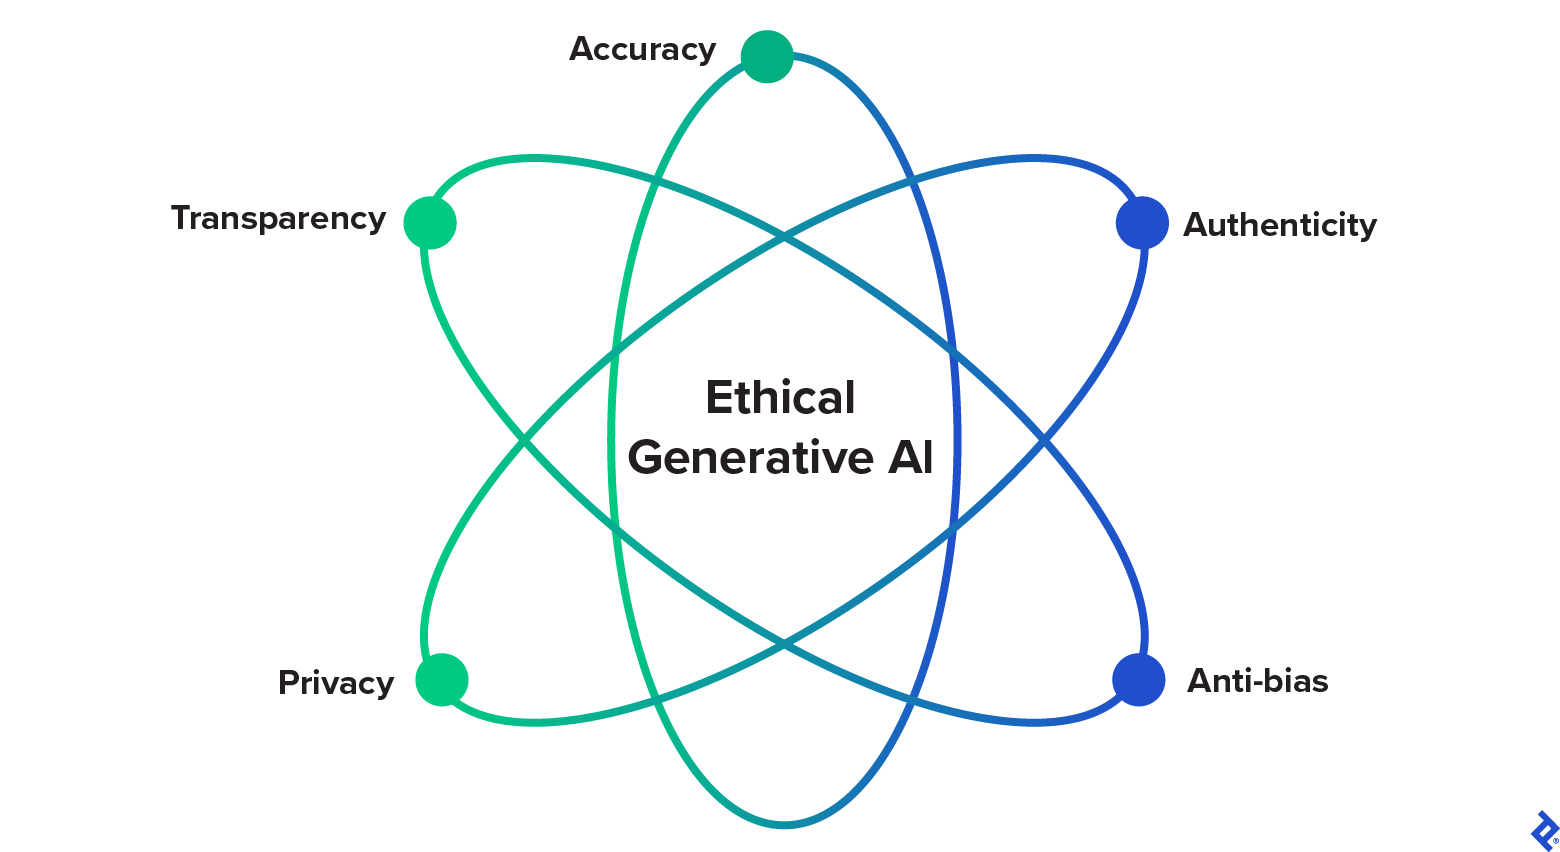 The ethical pillars of accuracy, authenticity, anti-bias, privacy, and transparency orbit a label saying “Ethical Generative AI.”